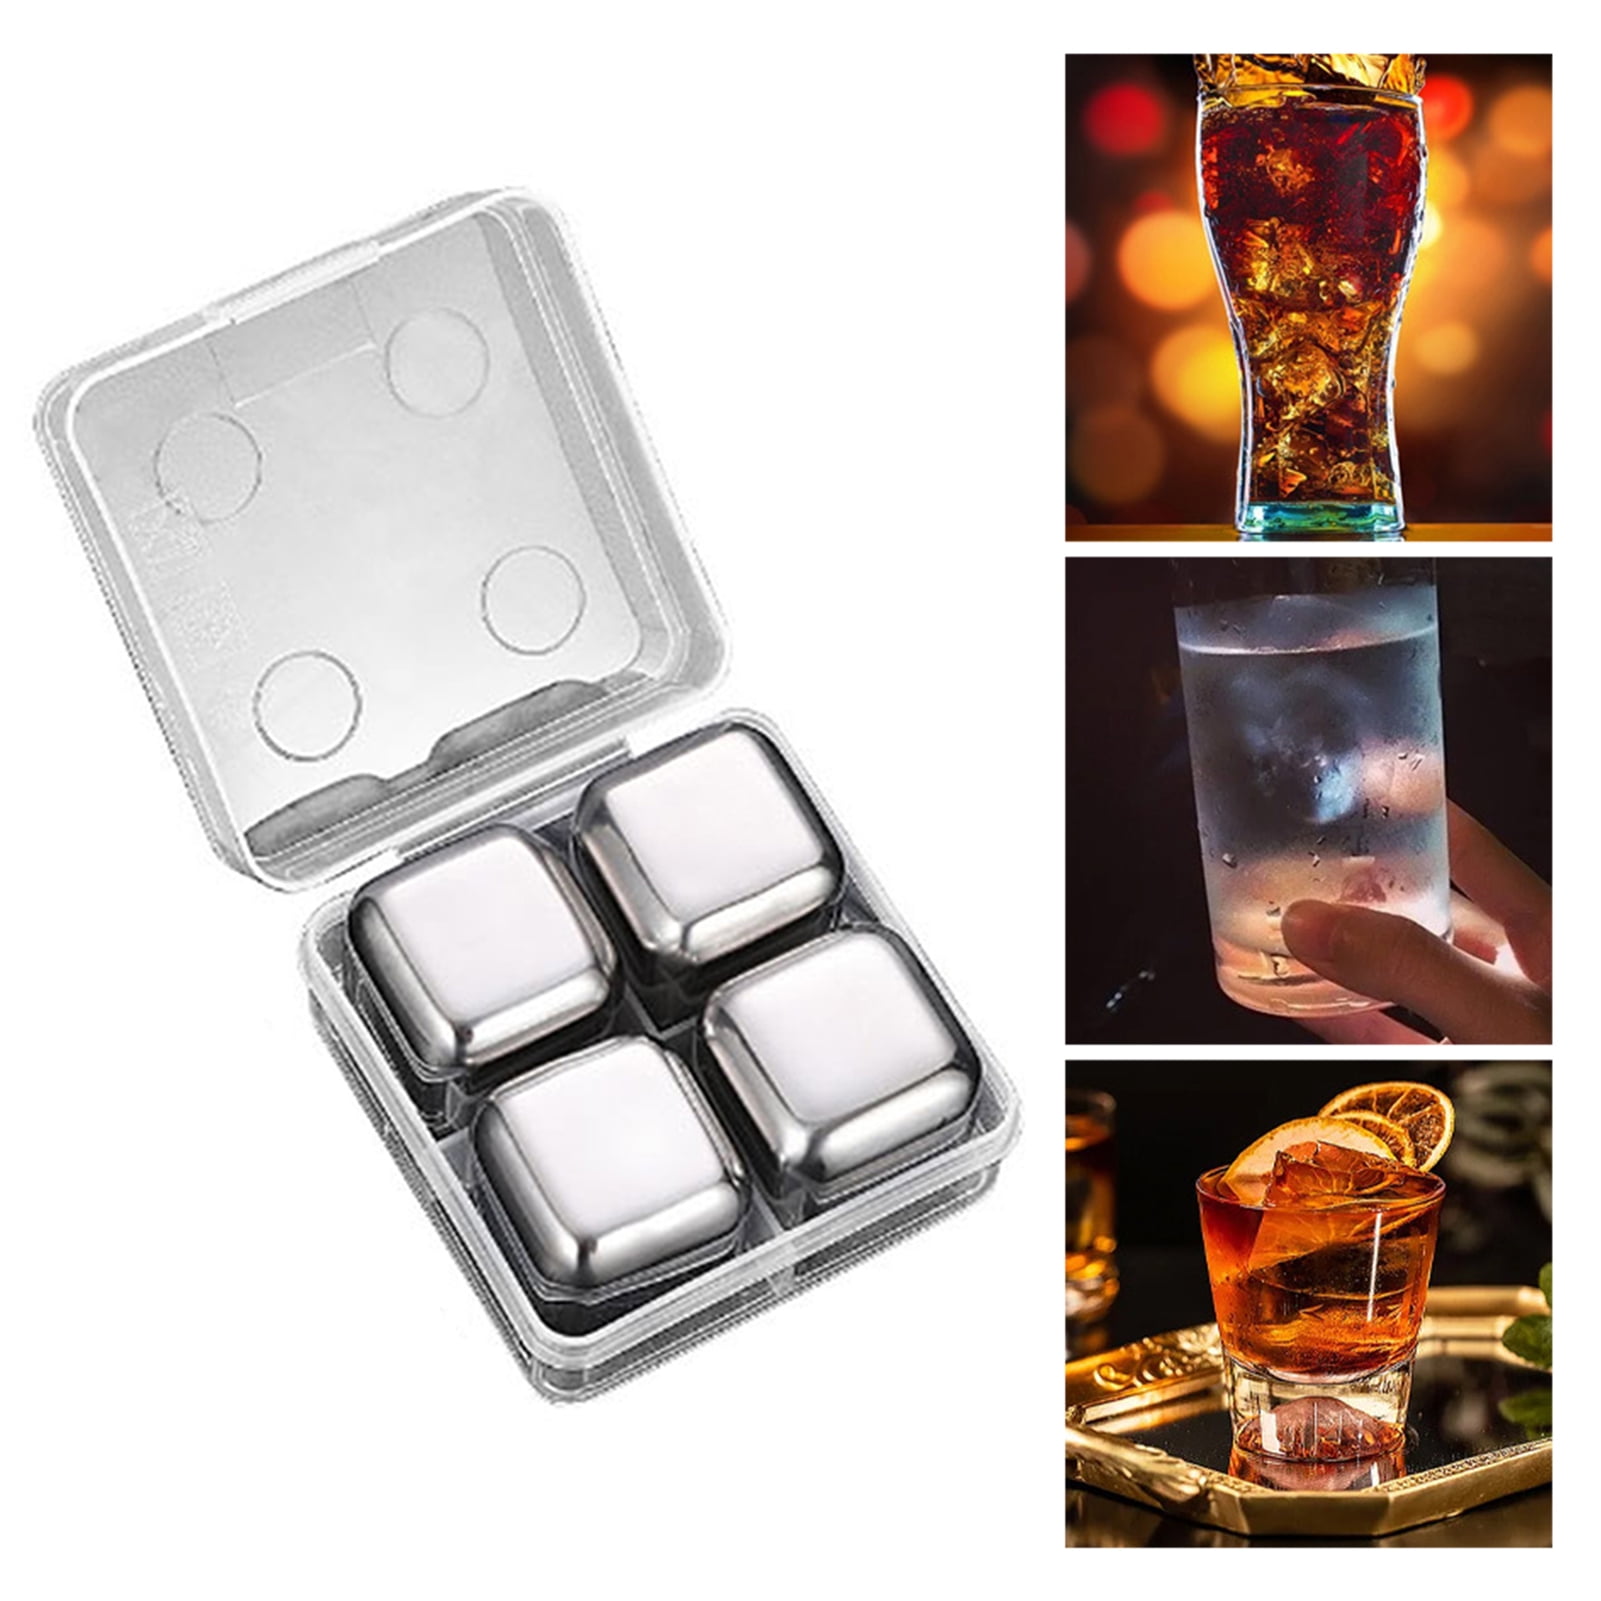 FunIdea Stainless steel reusable ice cubes chilling stones for whiskey-1.0  Cooling cube whiskey rocks 6-pack Gift for Men